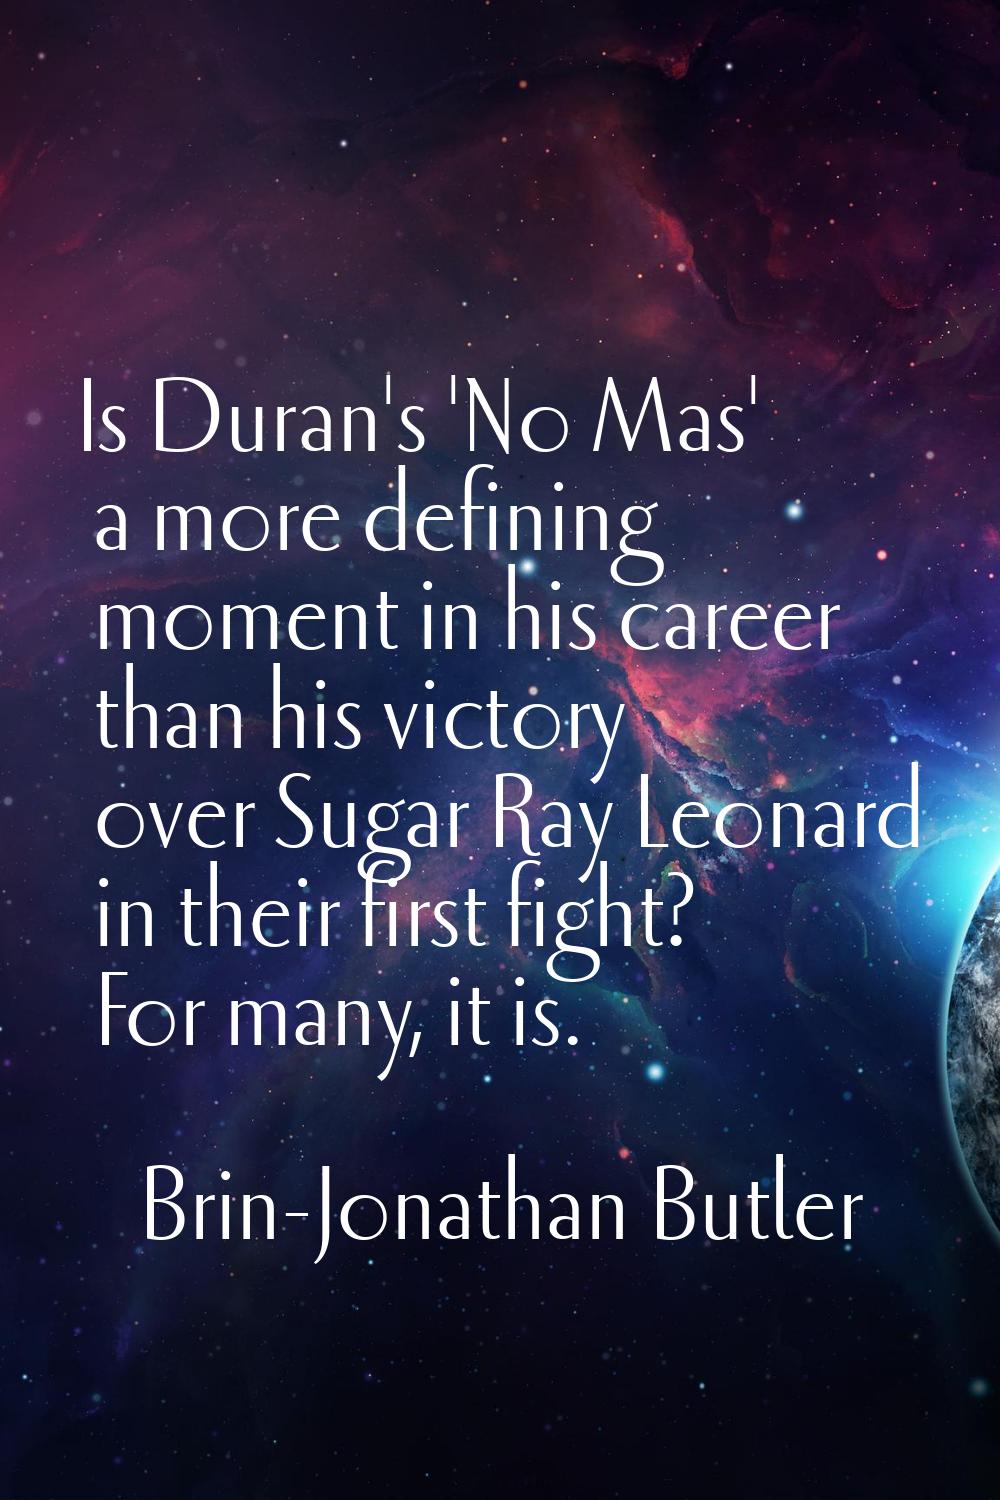 Is Duran's 'No Mas' a more defining moment in his career than his victory over Sugar Ray Leonard in